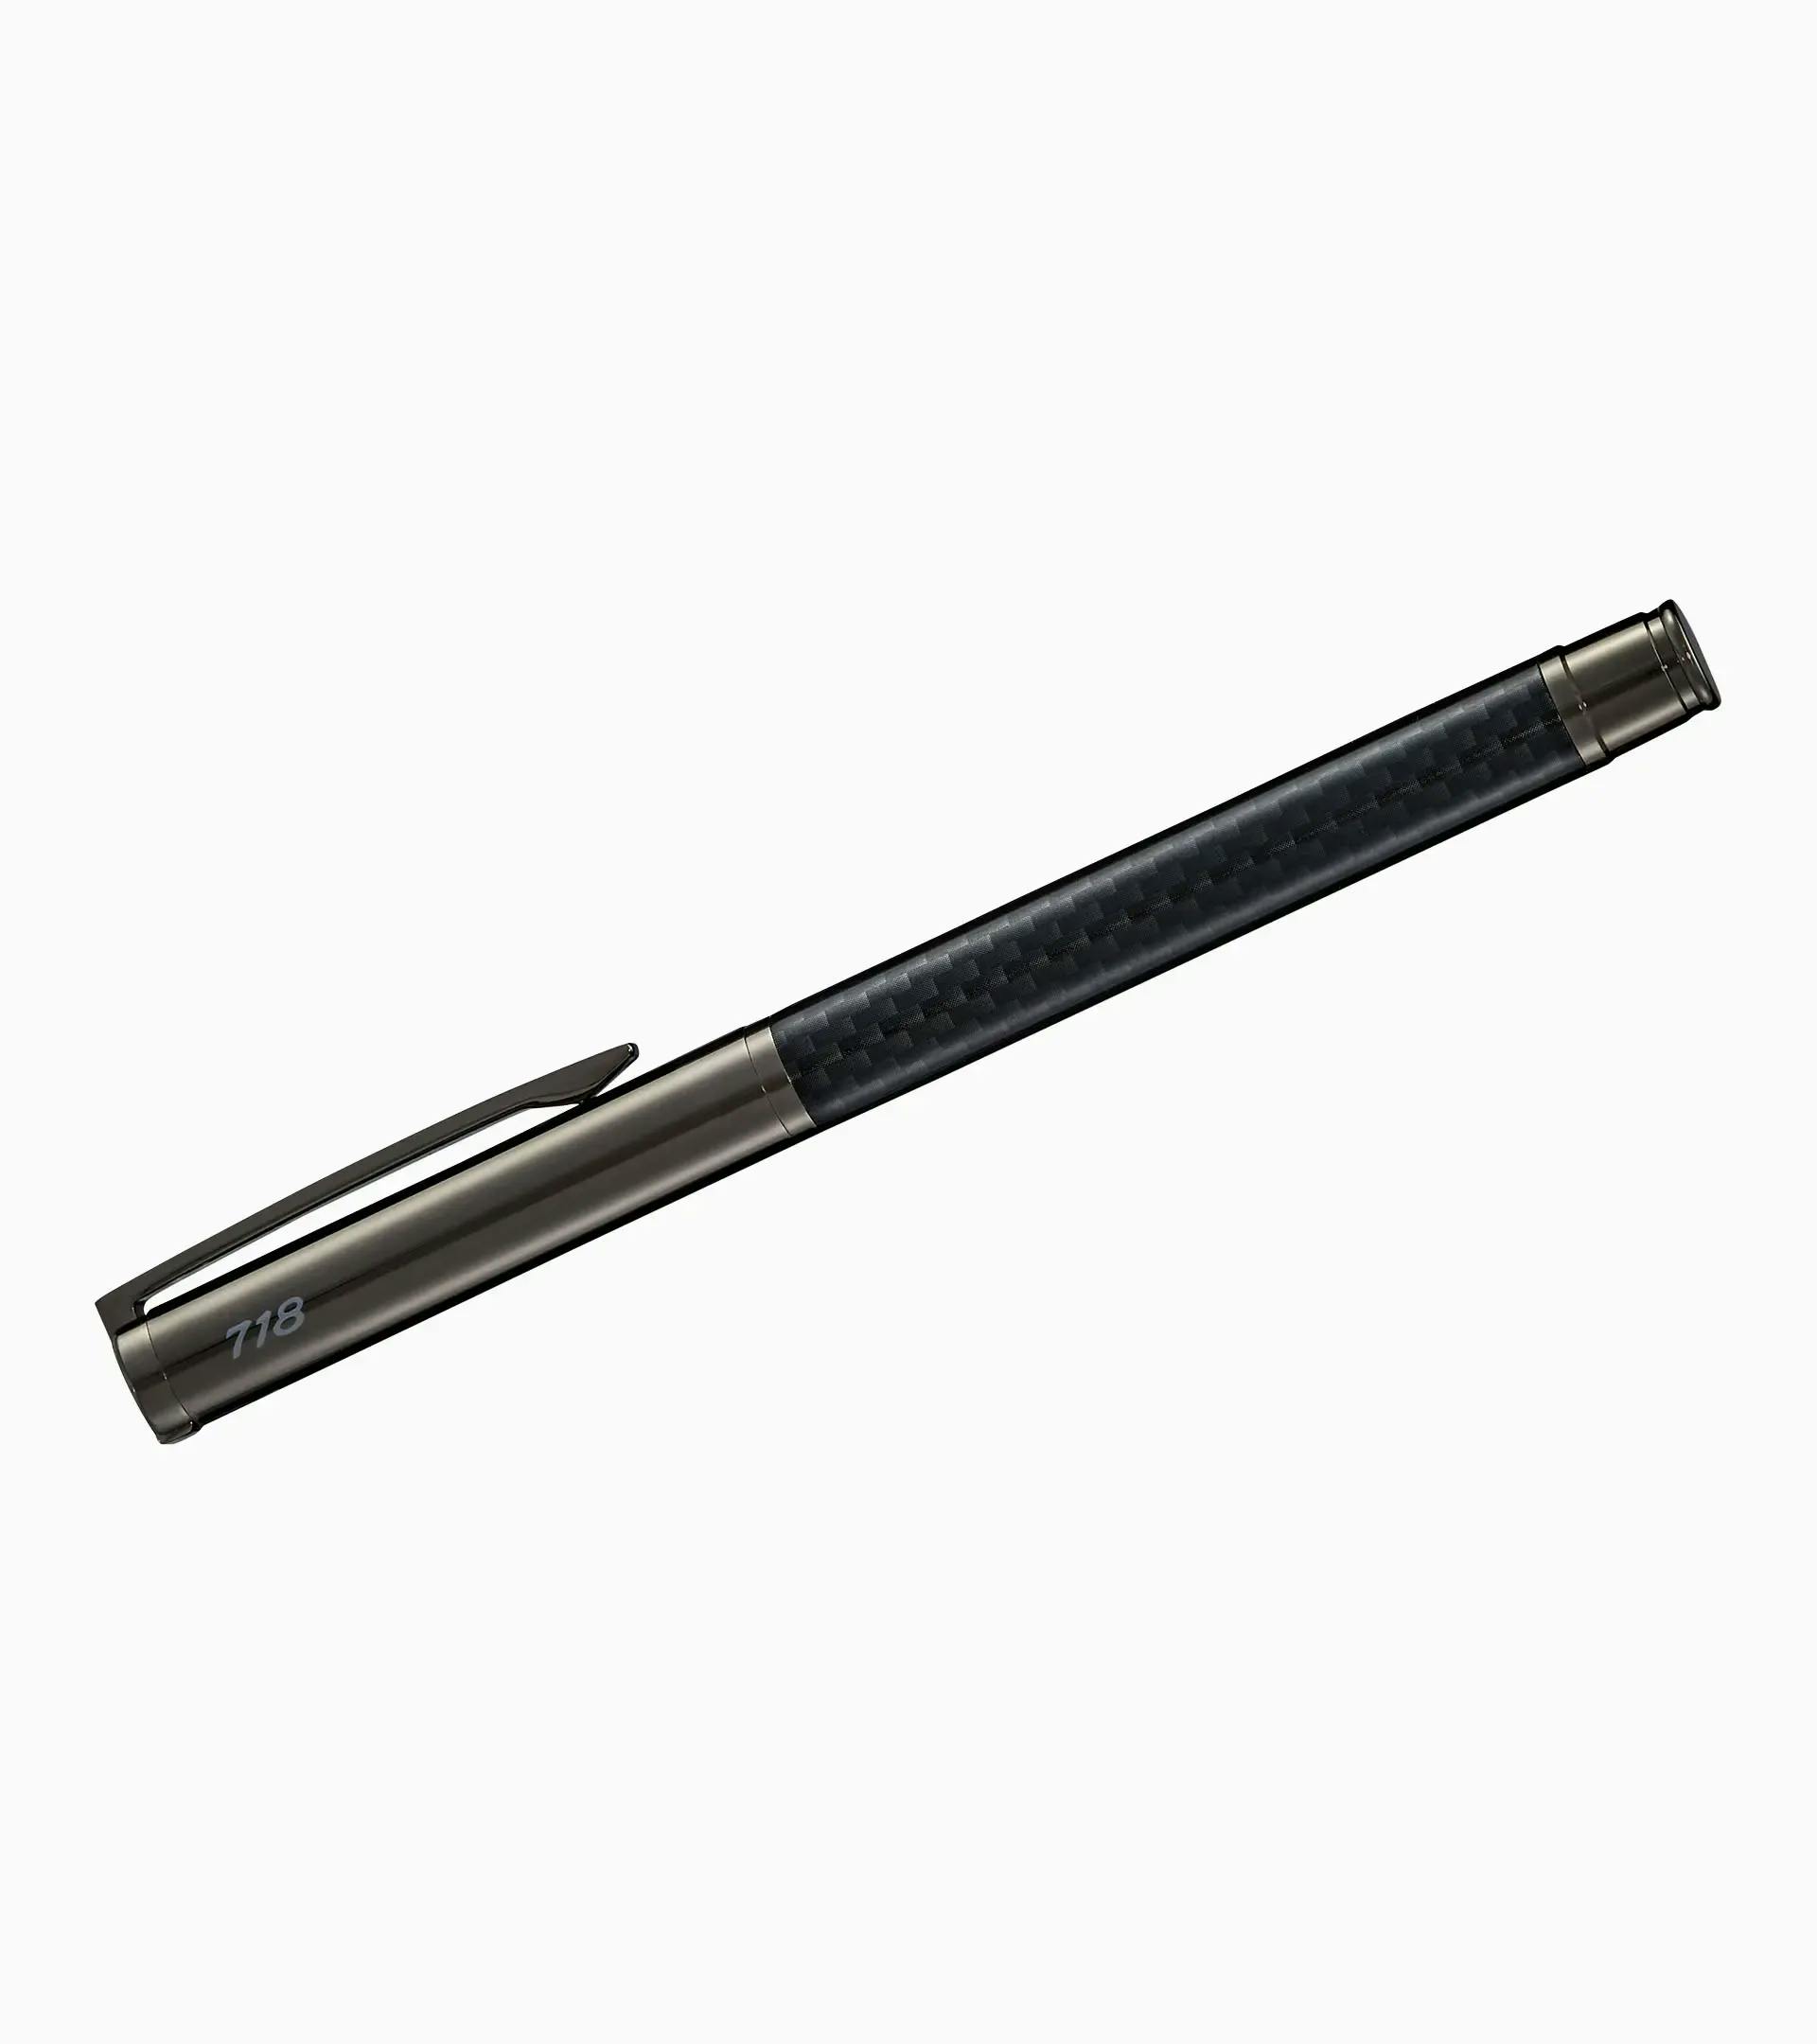 Stylo roller 718 – Essential